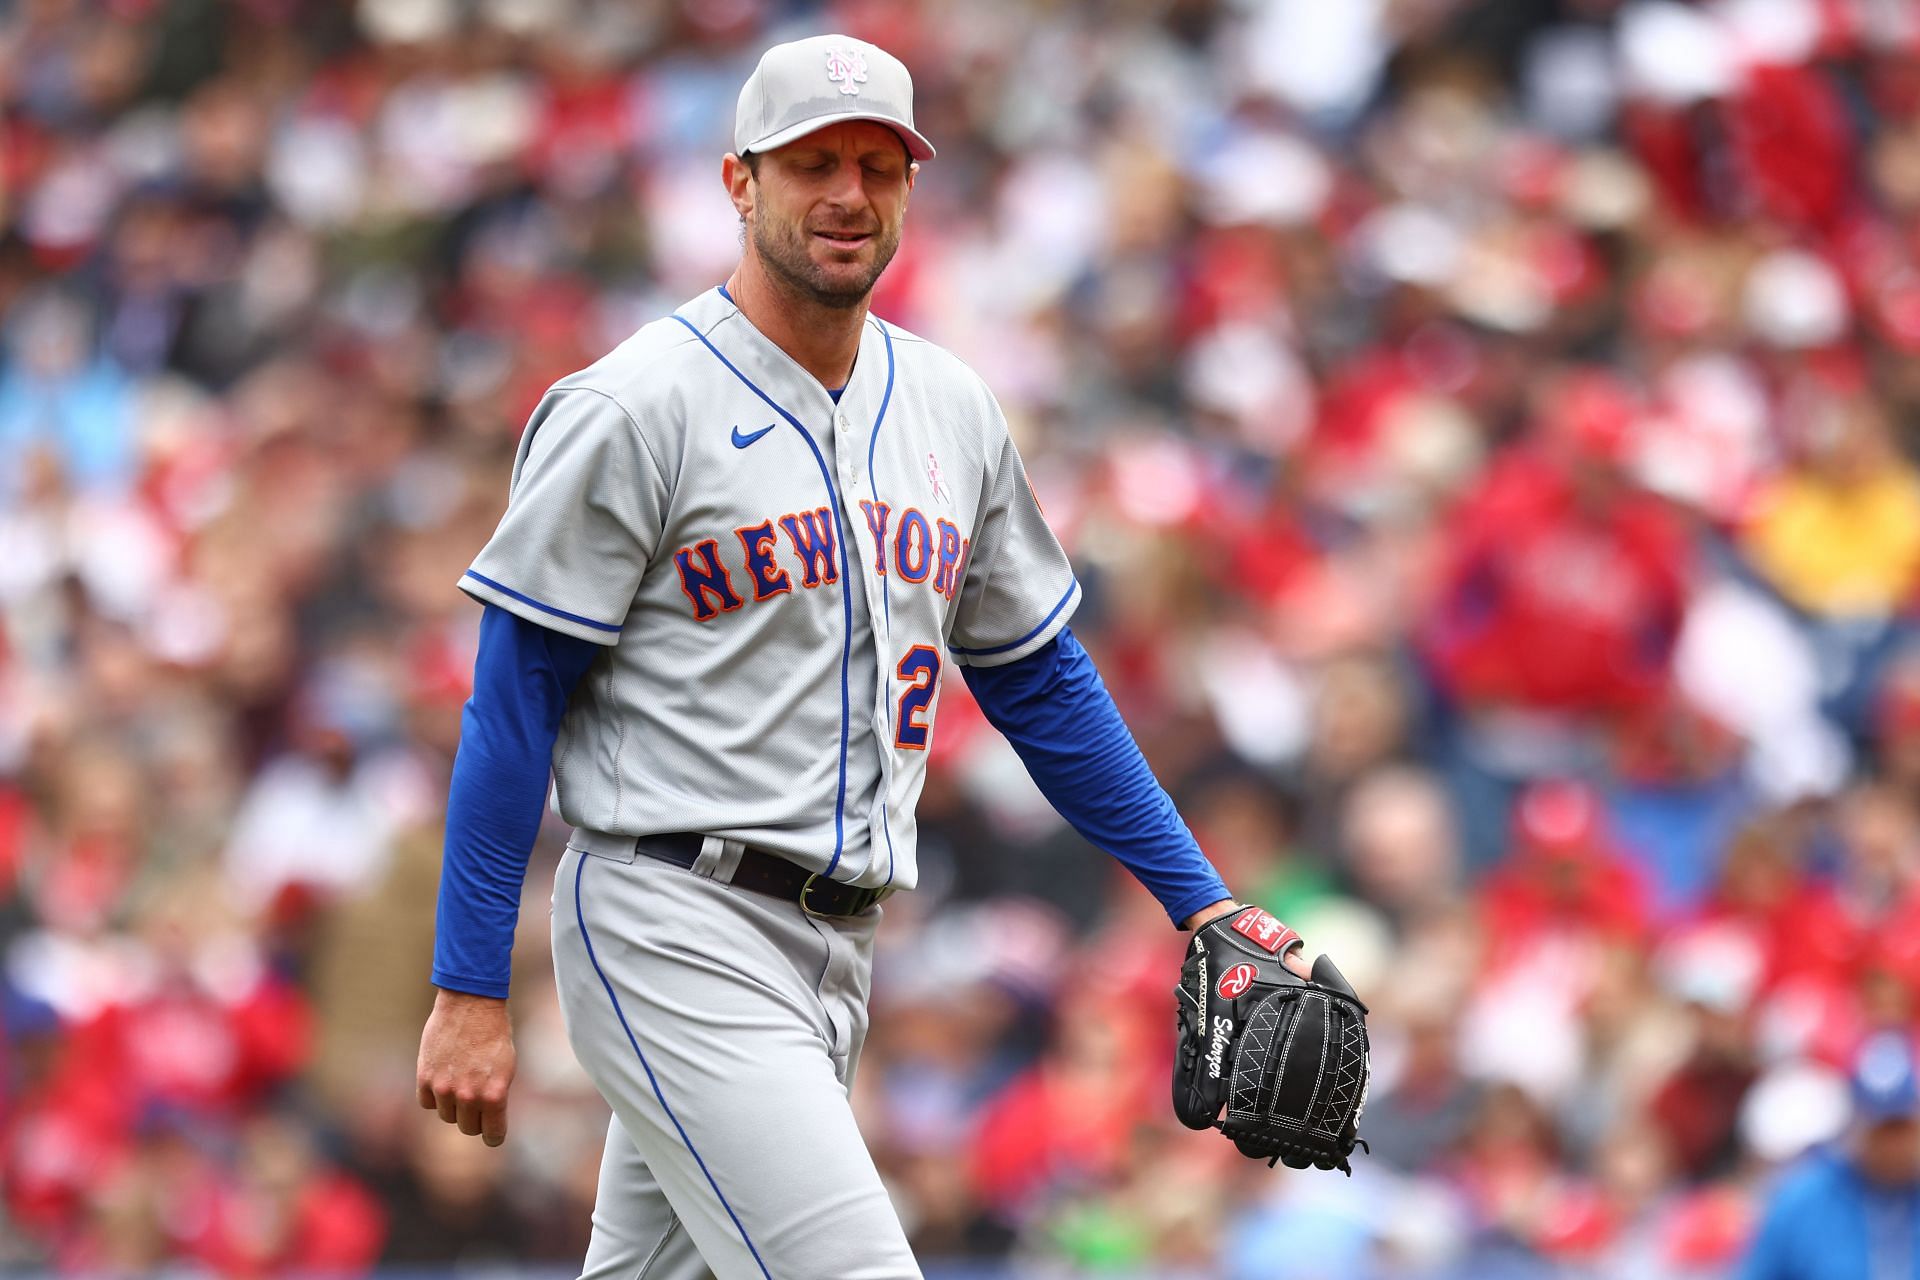 New York Mets starting pitcher Max Scherzer returned from an oblique injury tonight, but Atlanta Braves fans swooped in on Twitter to spoil the fun.